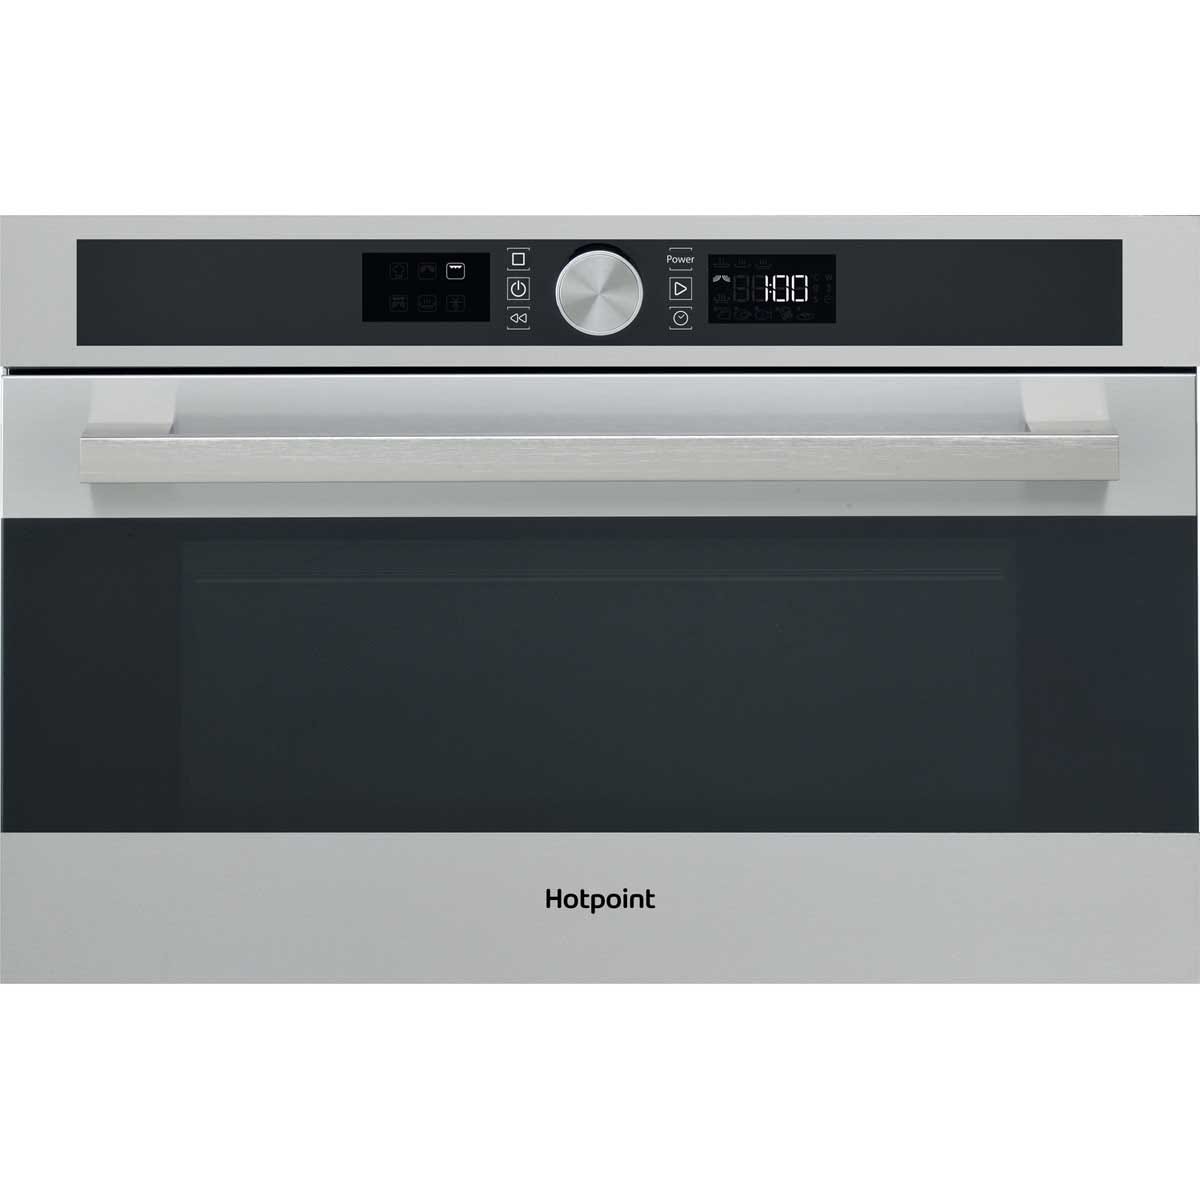 Hotpoint MD 554 IX H 1000W 31L Built in Microwave Oven - Stainless Steel